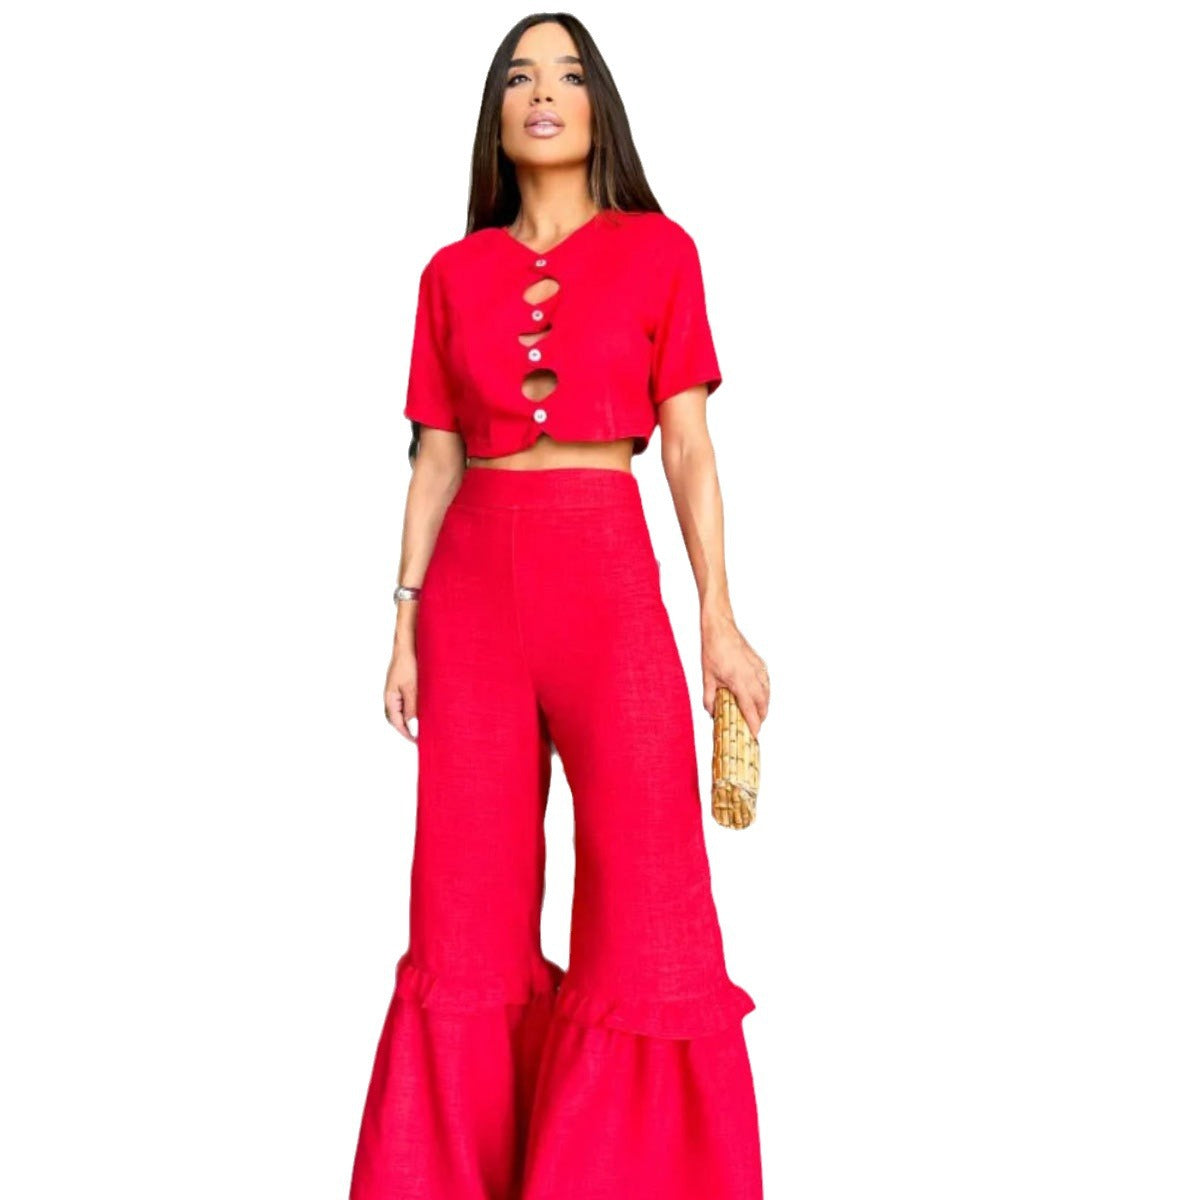 Women's Short Sleeve Hollow-out Midriff Wide Leg Fashion Suit